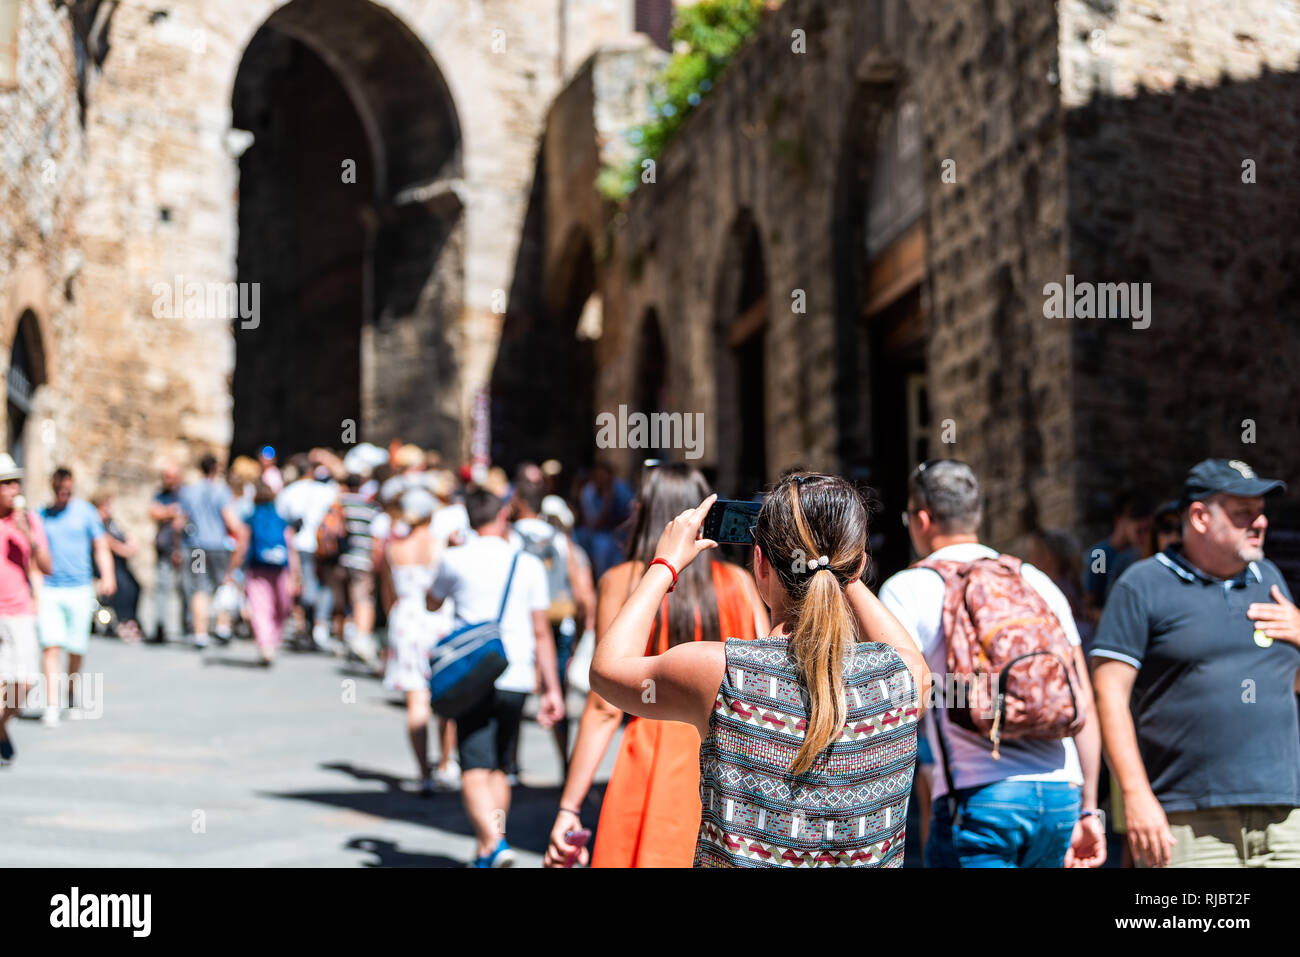 San Gimignano, Italy - August 27, 2018: Back of many crowd of people tour group walking exploring arch of small historic medieval town village in Tusc Stock Photo